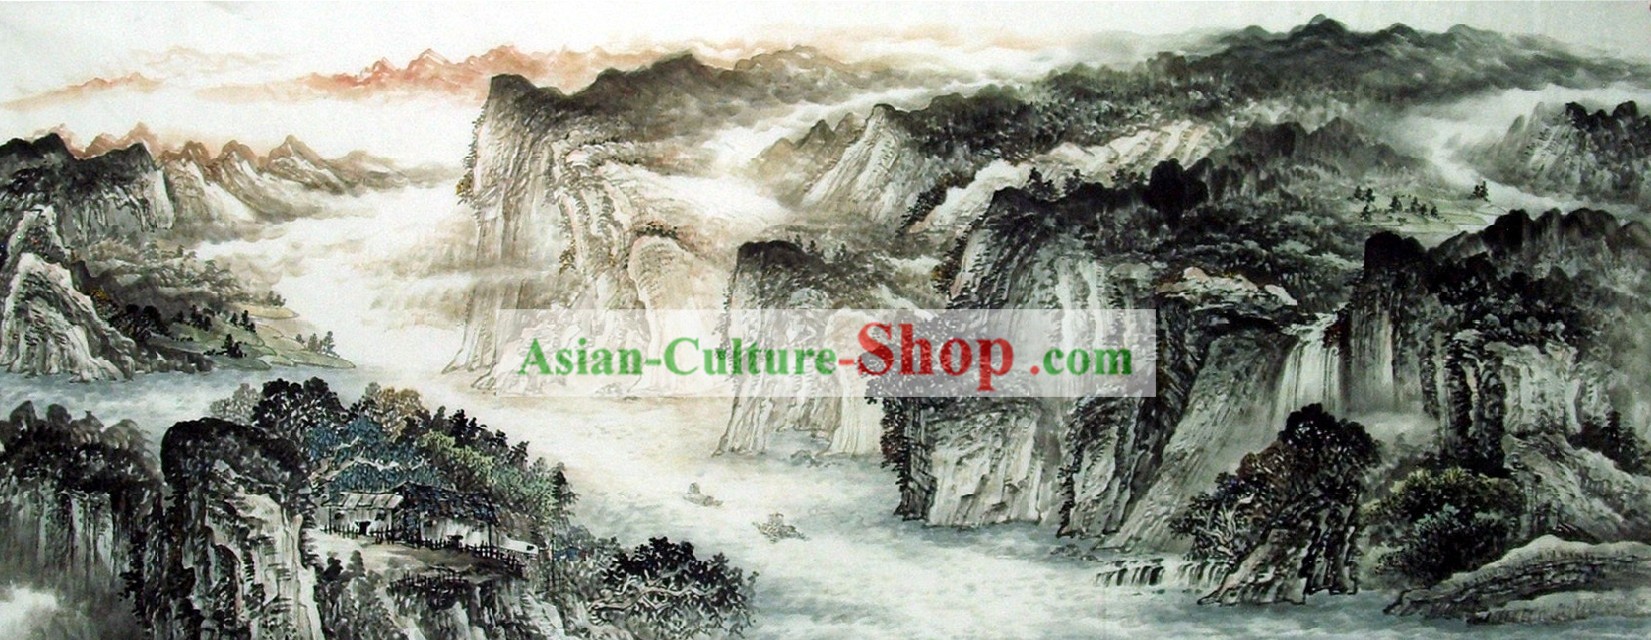 Peintures paysage traditionnel chinois